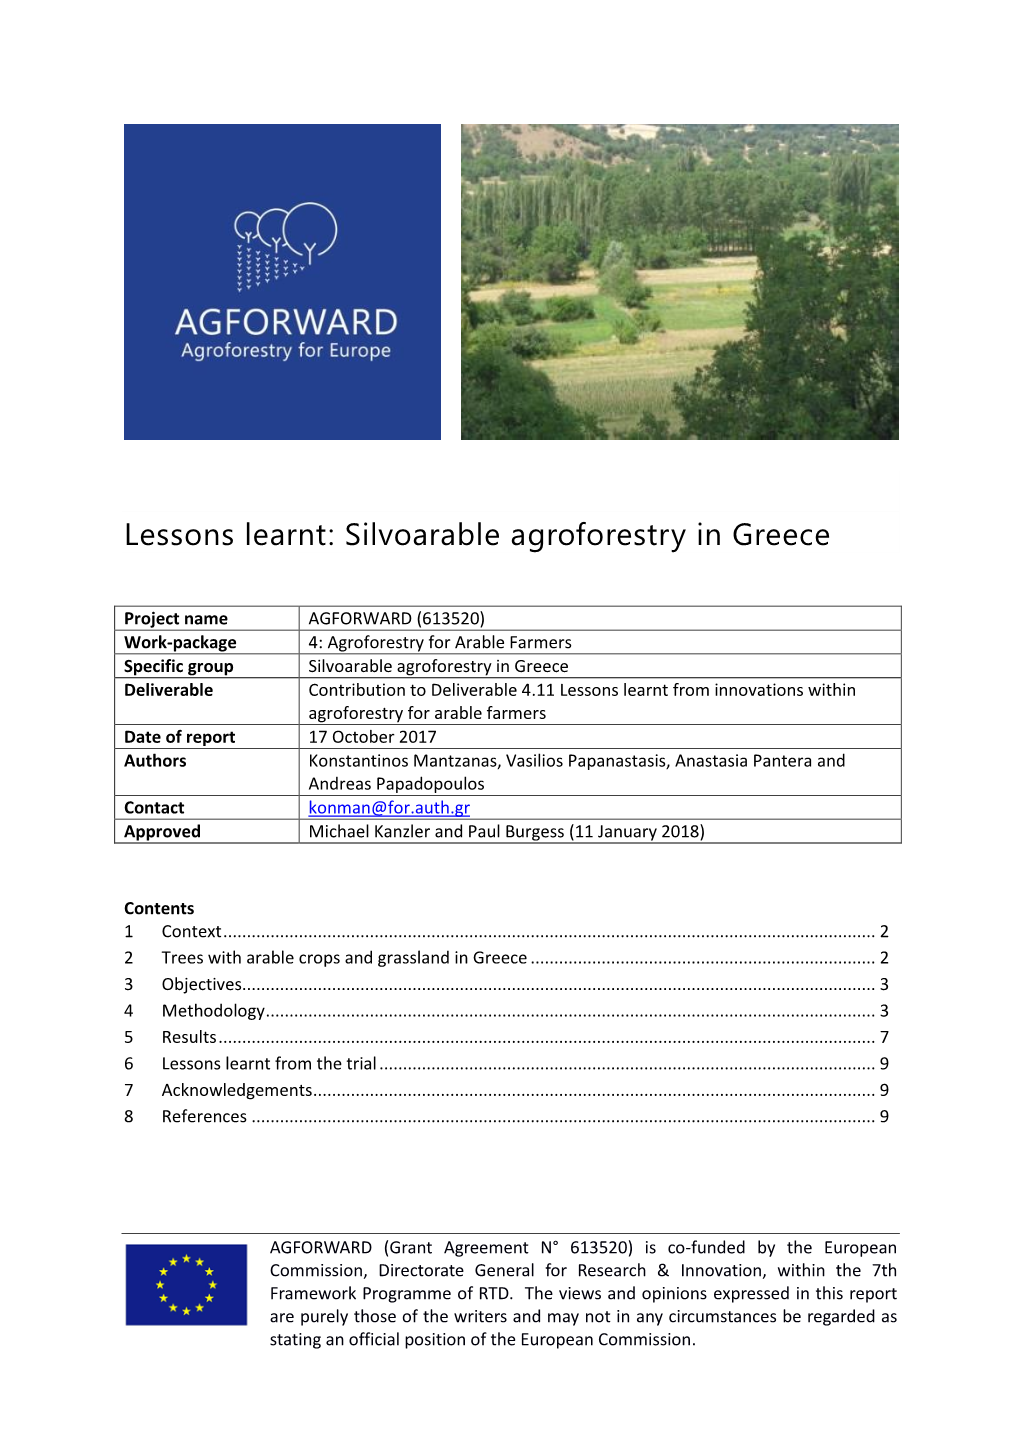 Lessons Learnt: Silvoarable Agroforestry in Greece